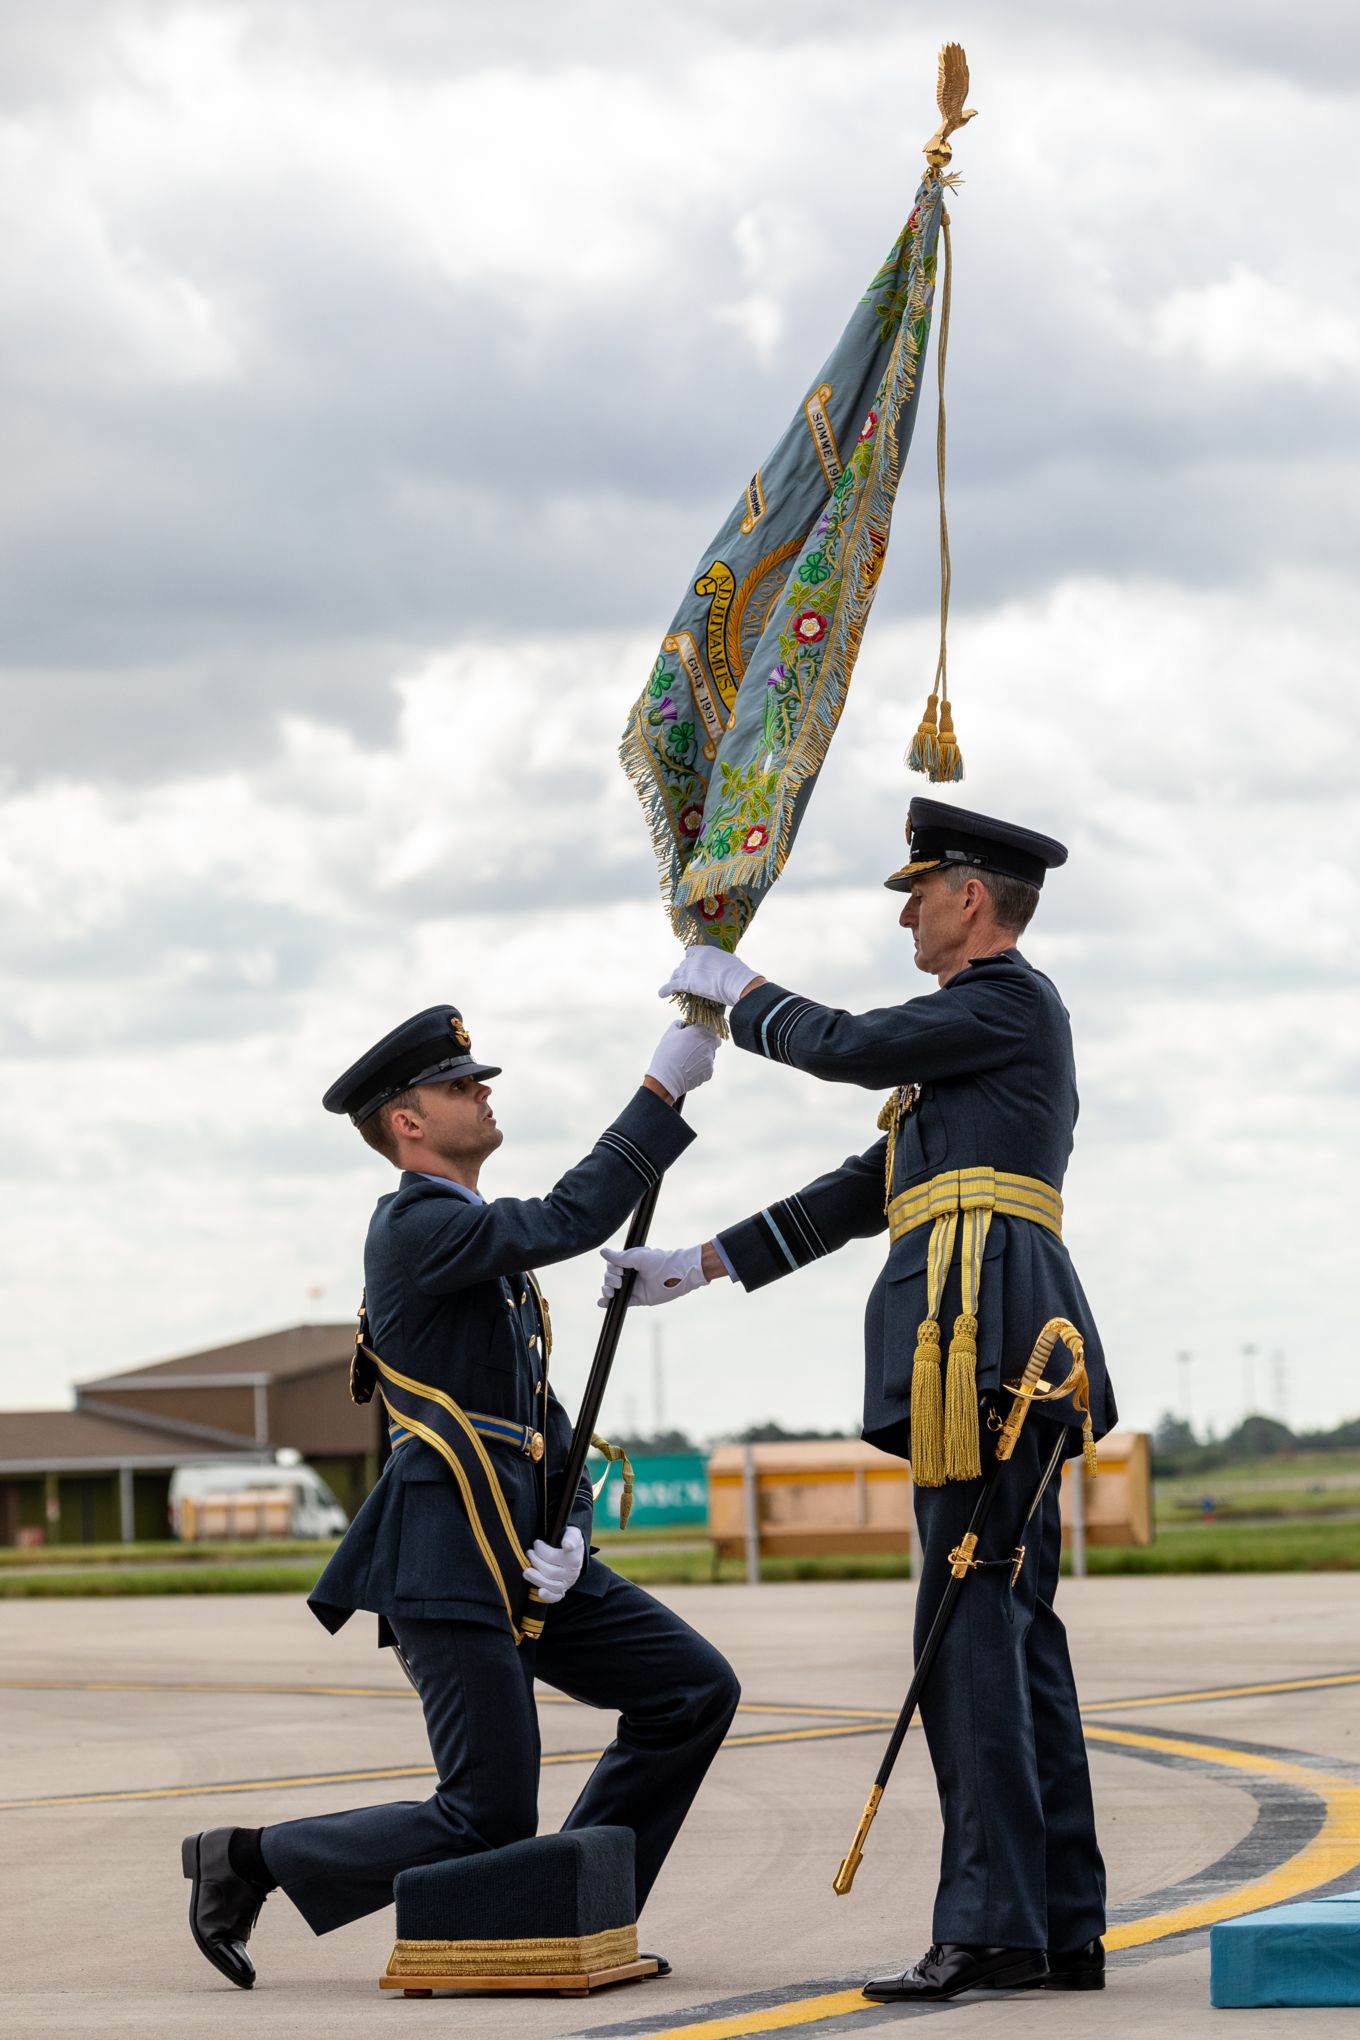 Personnel on Parade, with Colour-bearer.